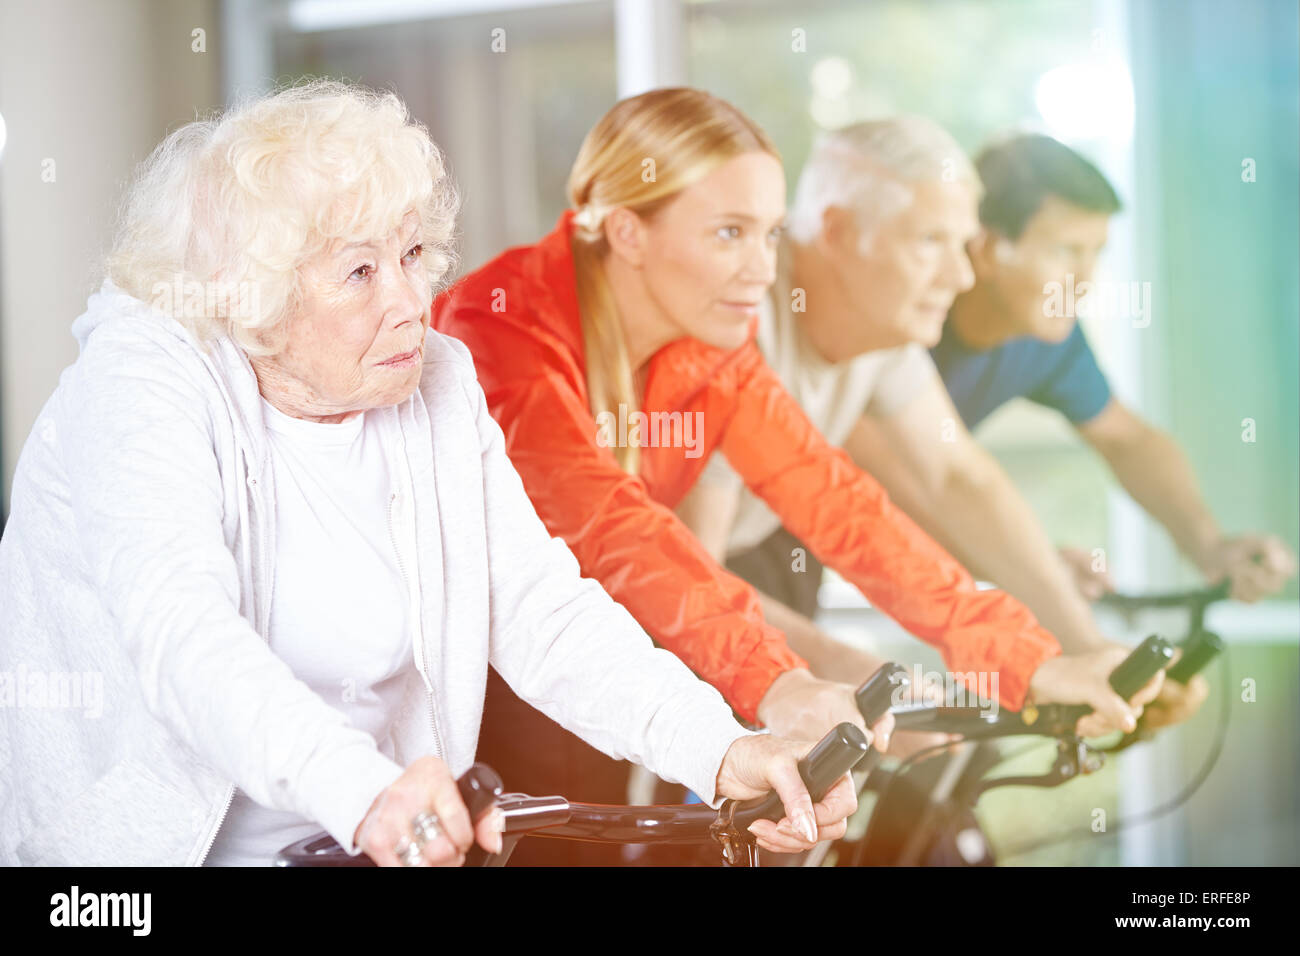 Old woman exercising in group on a spinning bike in gym Stock Photo